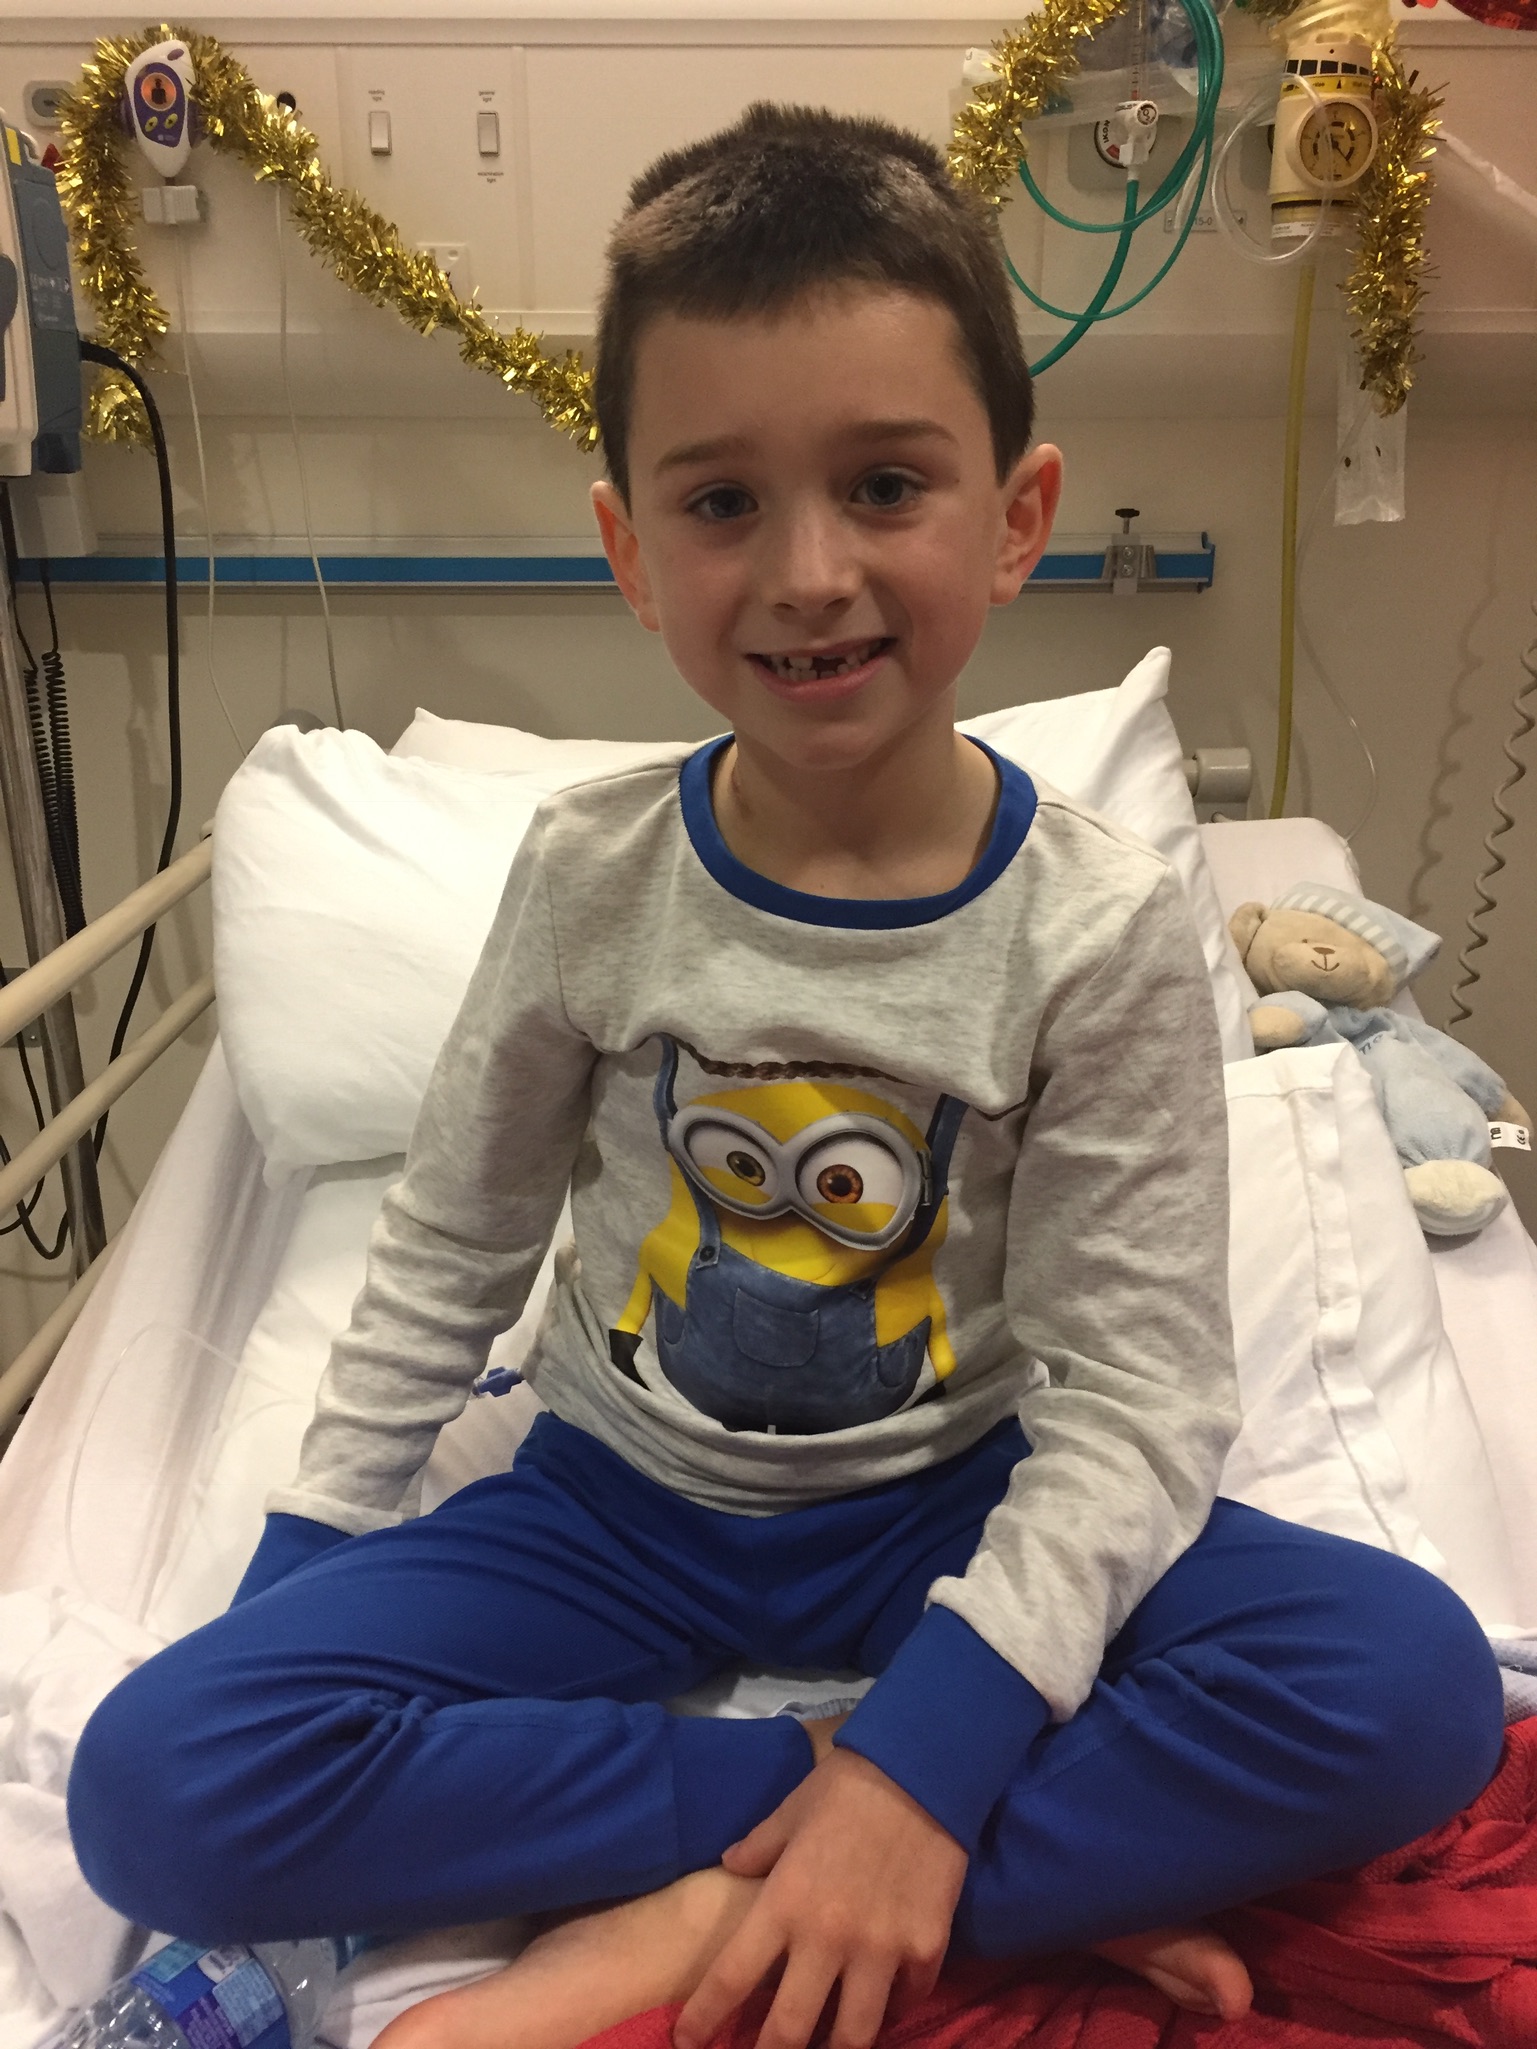 Daniel sat up in a hospital bed, smiling at the camera, wearing Minion pyjamas